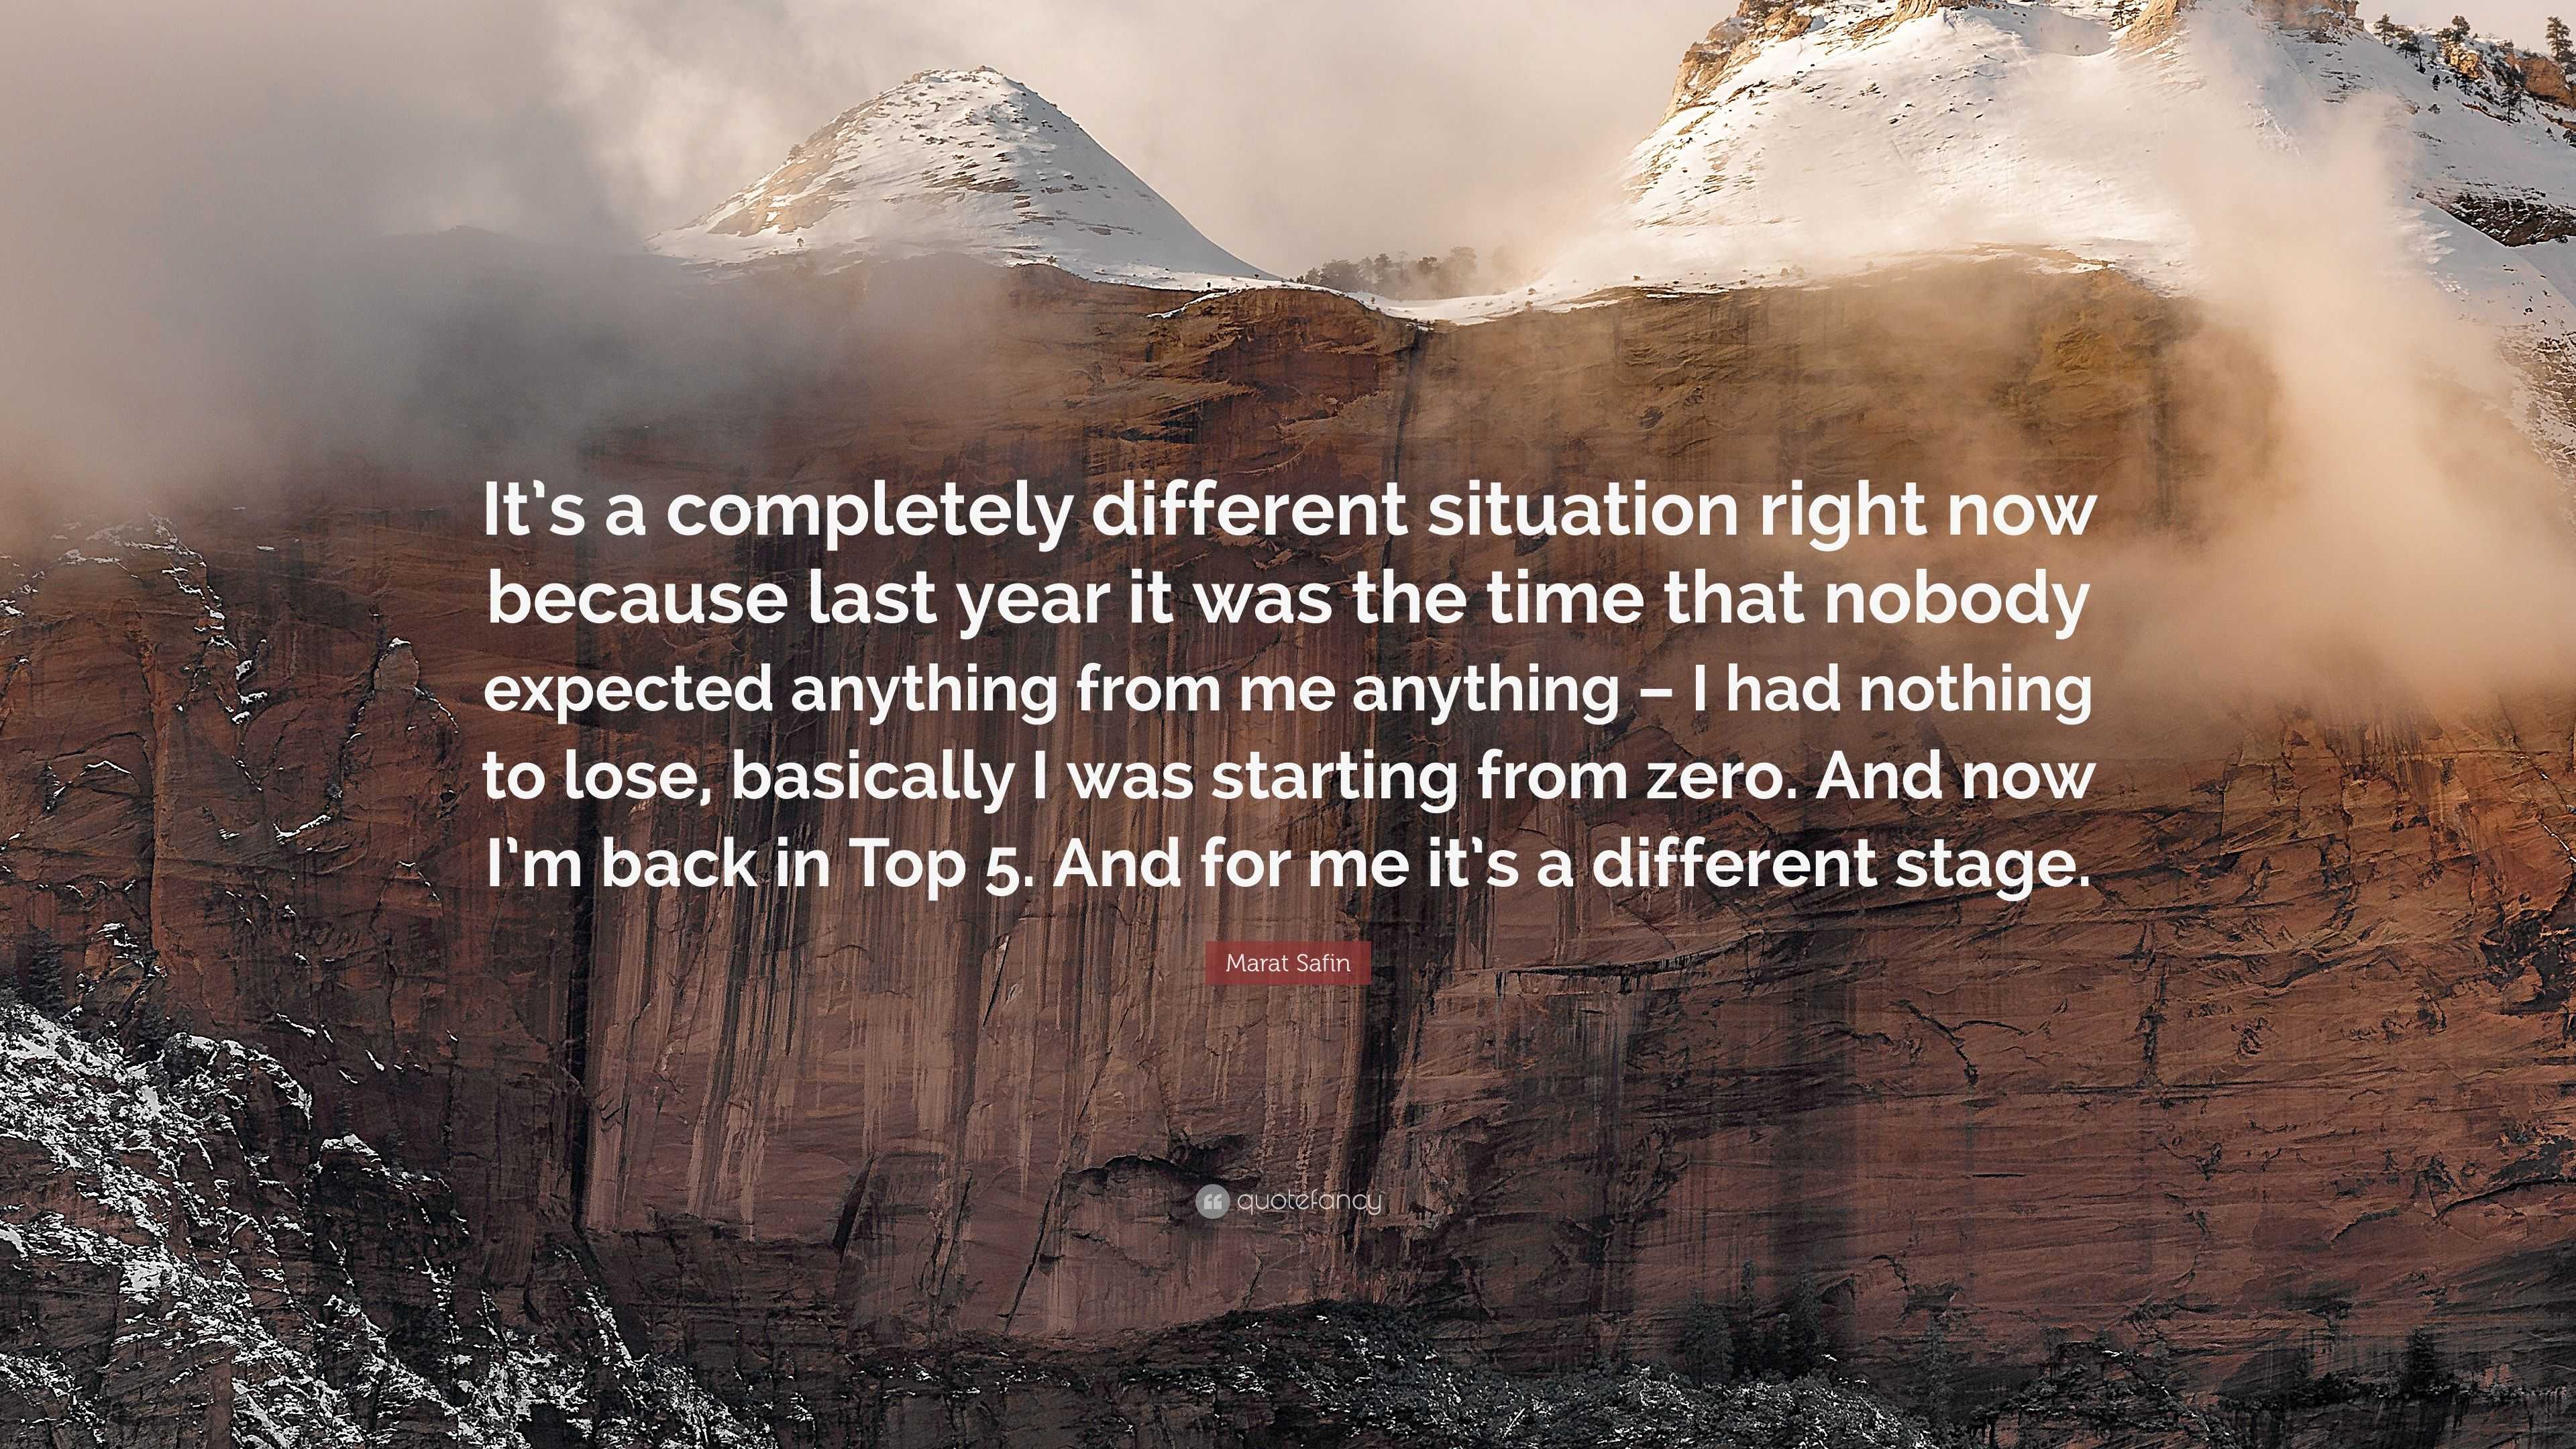 Marat Safin Quote: “It's A Completely Different Situation Right Now Because Last Year It Was The Time That Nobody Expected Anything From Me ...”